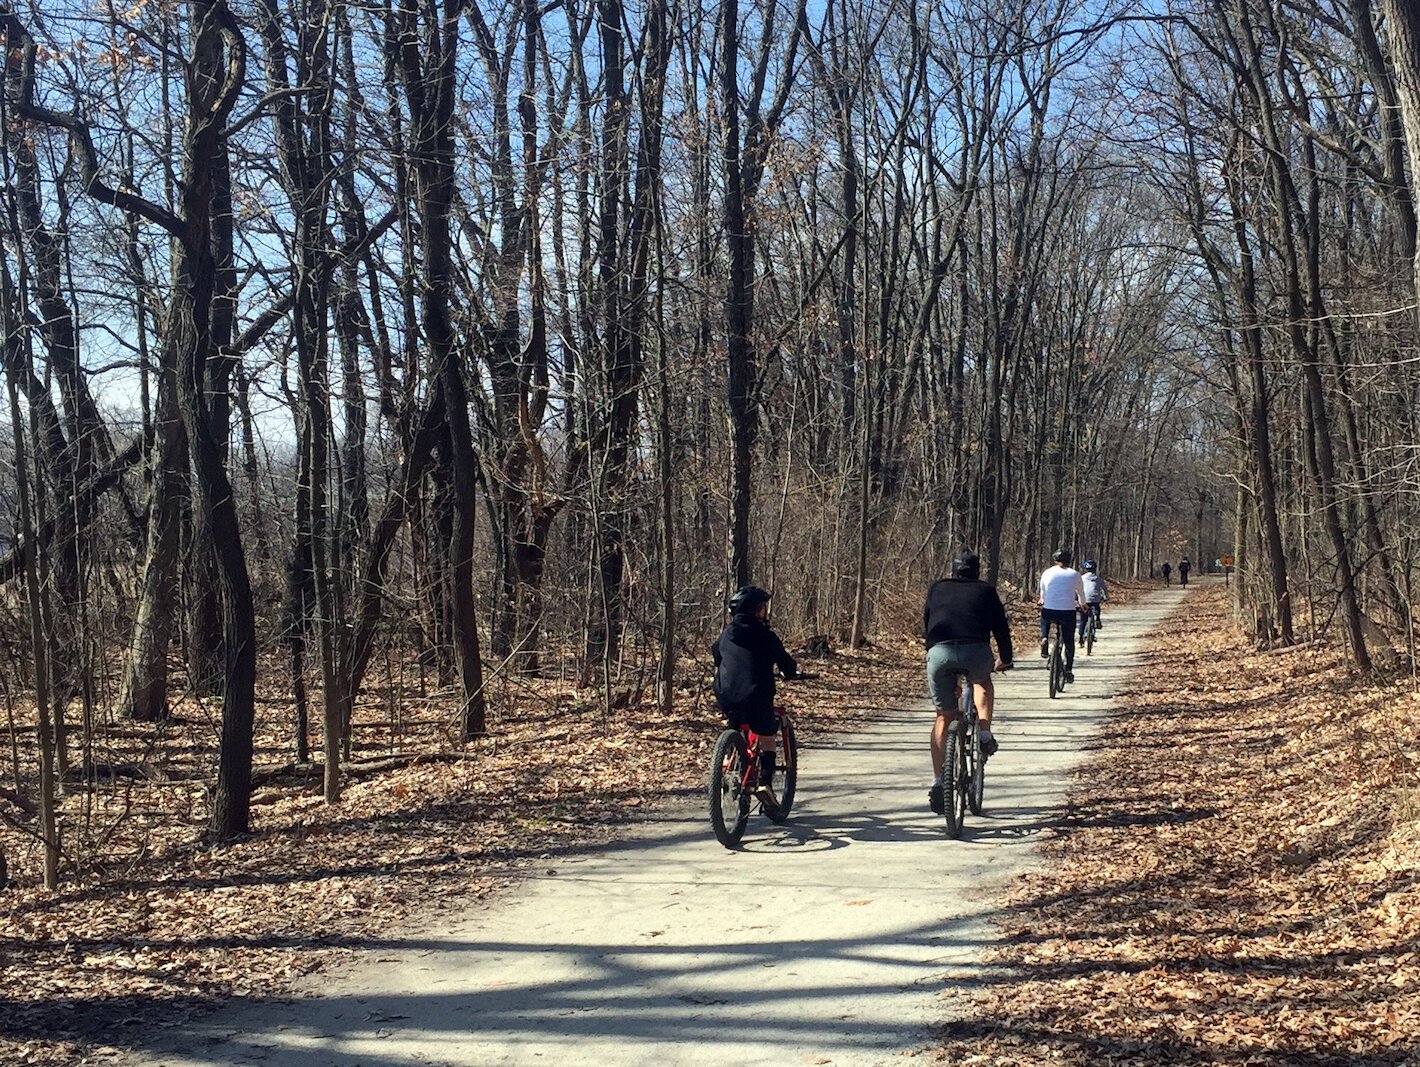 Last March 25, the Kal-Haven trail has surprisingly heavy traffic for a cold Wednesday afternoon.